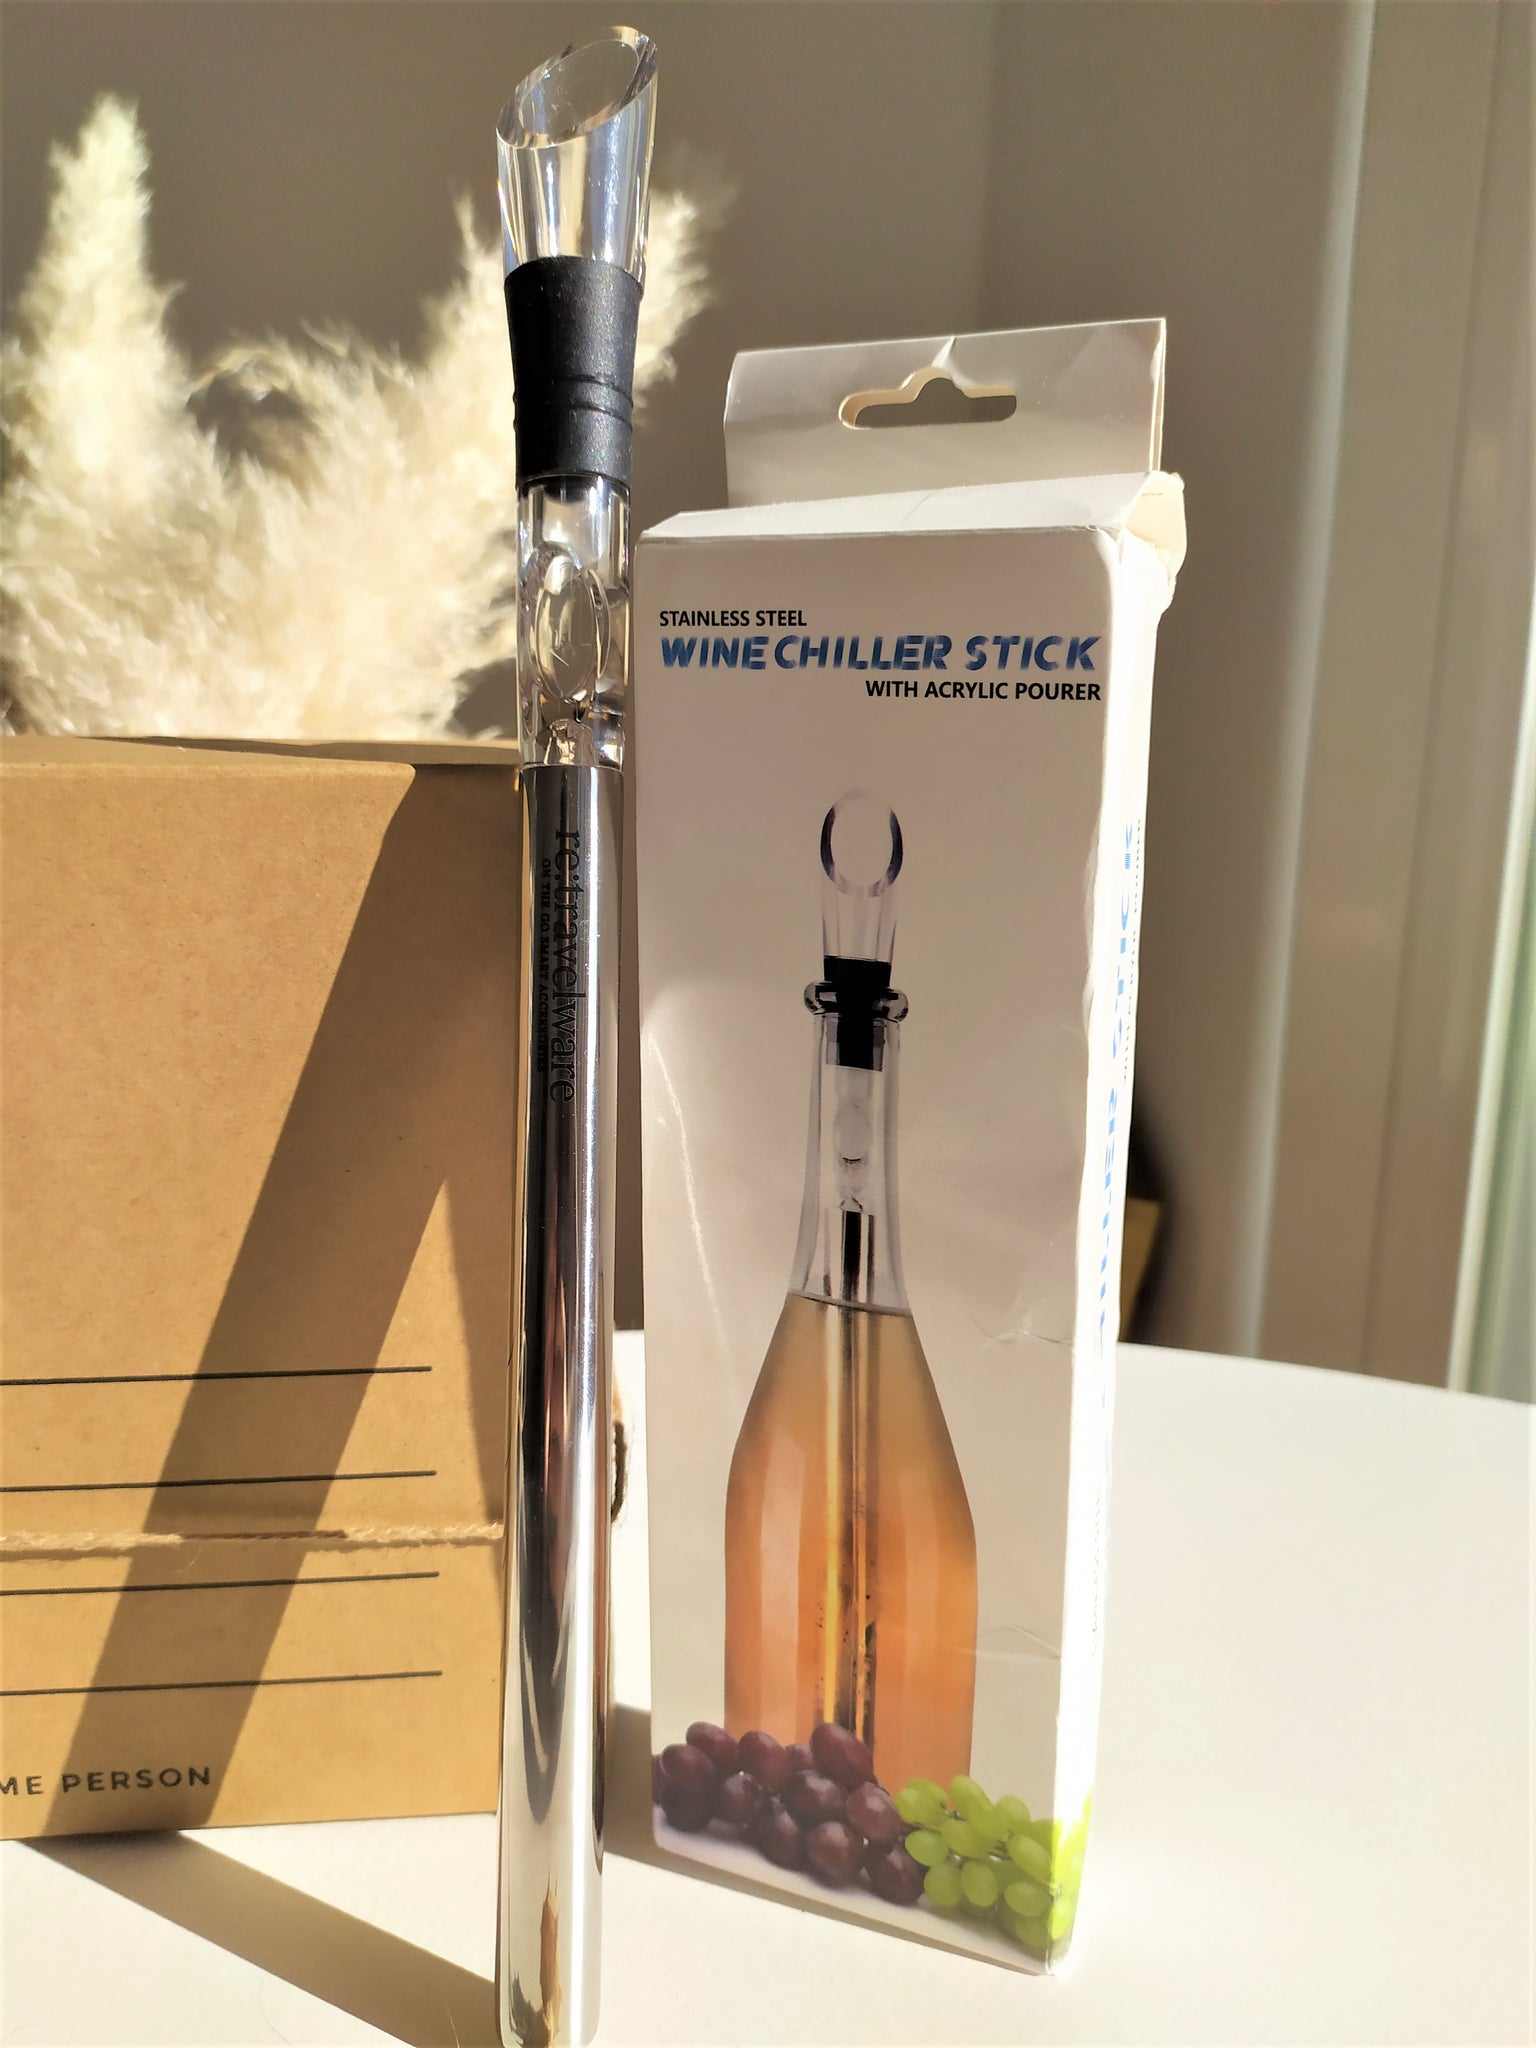 Wine Cooler Rod,fast Wine Chiller With Stainless Steel Wine Pouer And Chill  Rod,wine Bottle Cooler Stick With Aerator Pourer